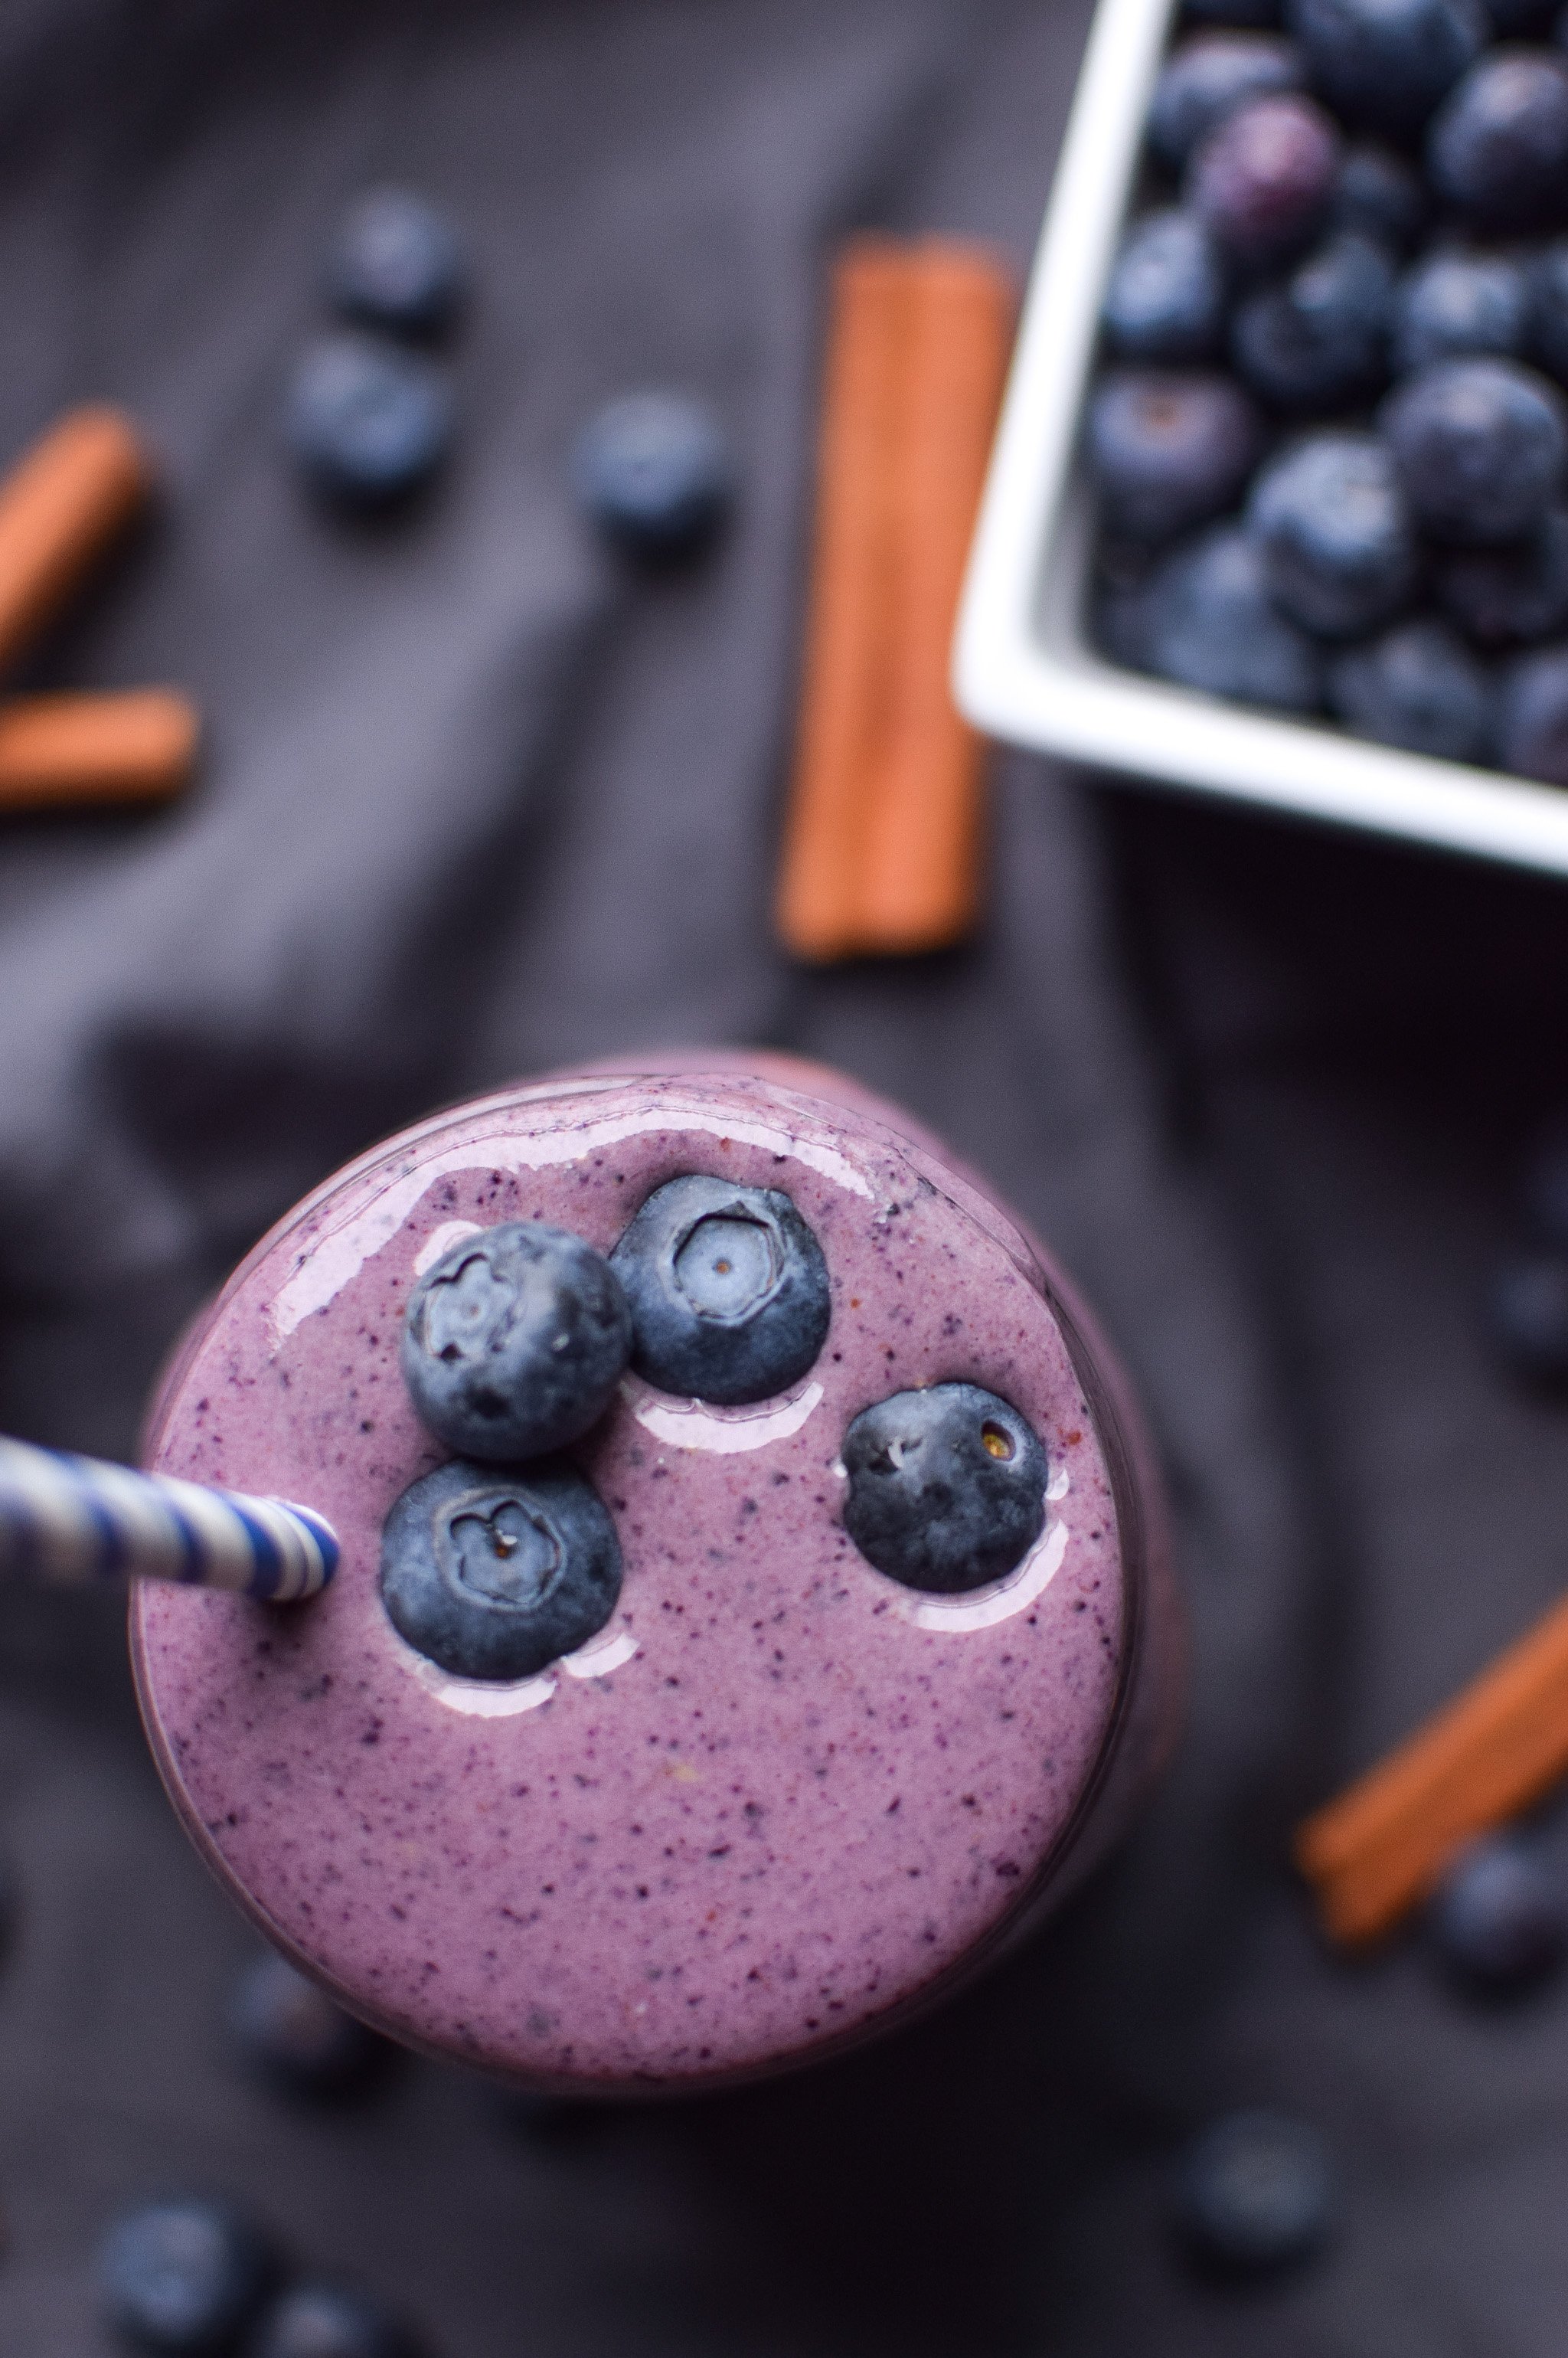 PB2 Powdered Peanut Butter Blueberry Cinnamon Smoothie recipe - Creamy and delicious protein smoothie with blueberries, banana, greek yogurt, and PB2! - ProjectMealPlan.com